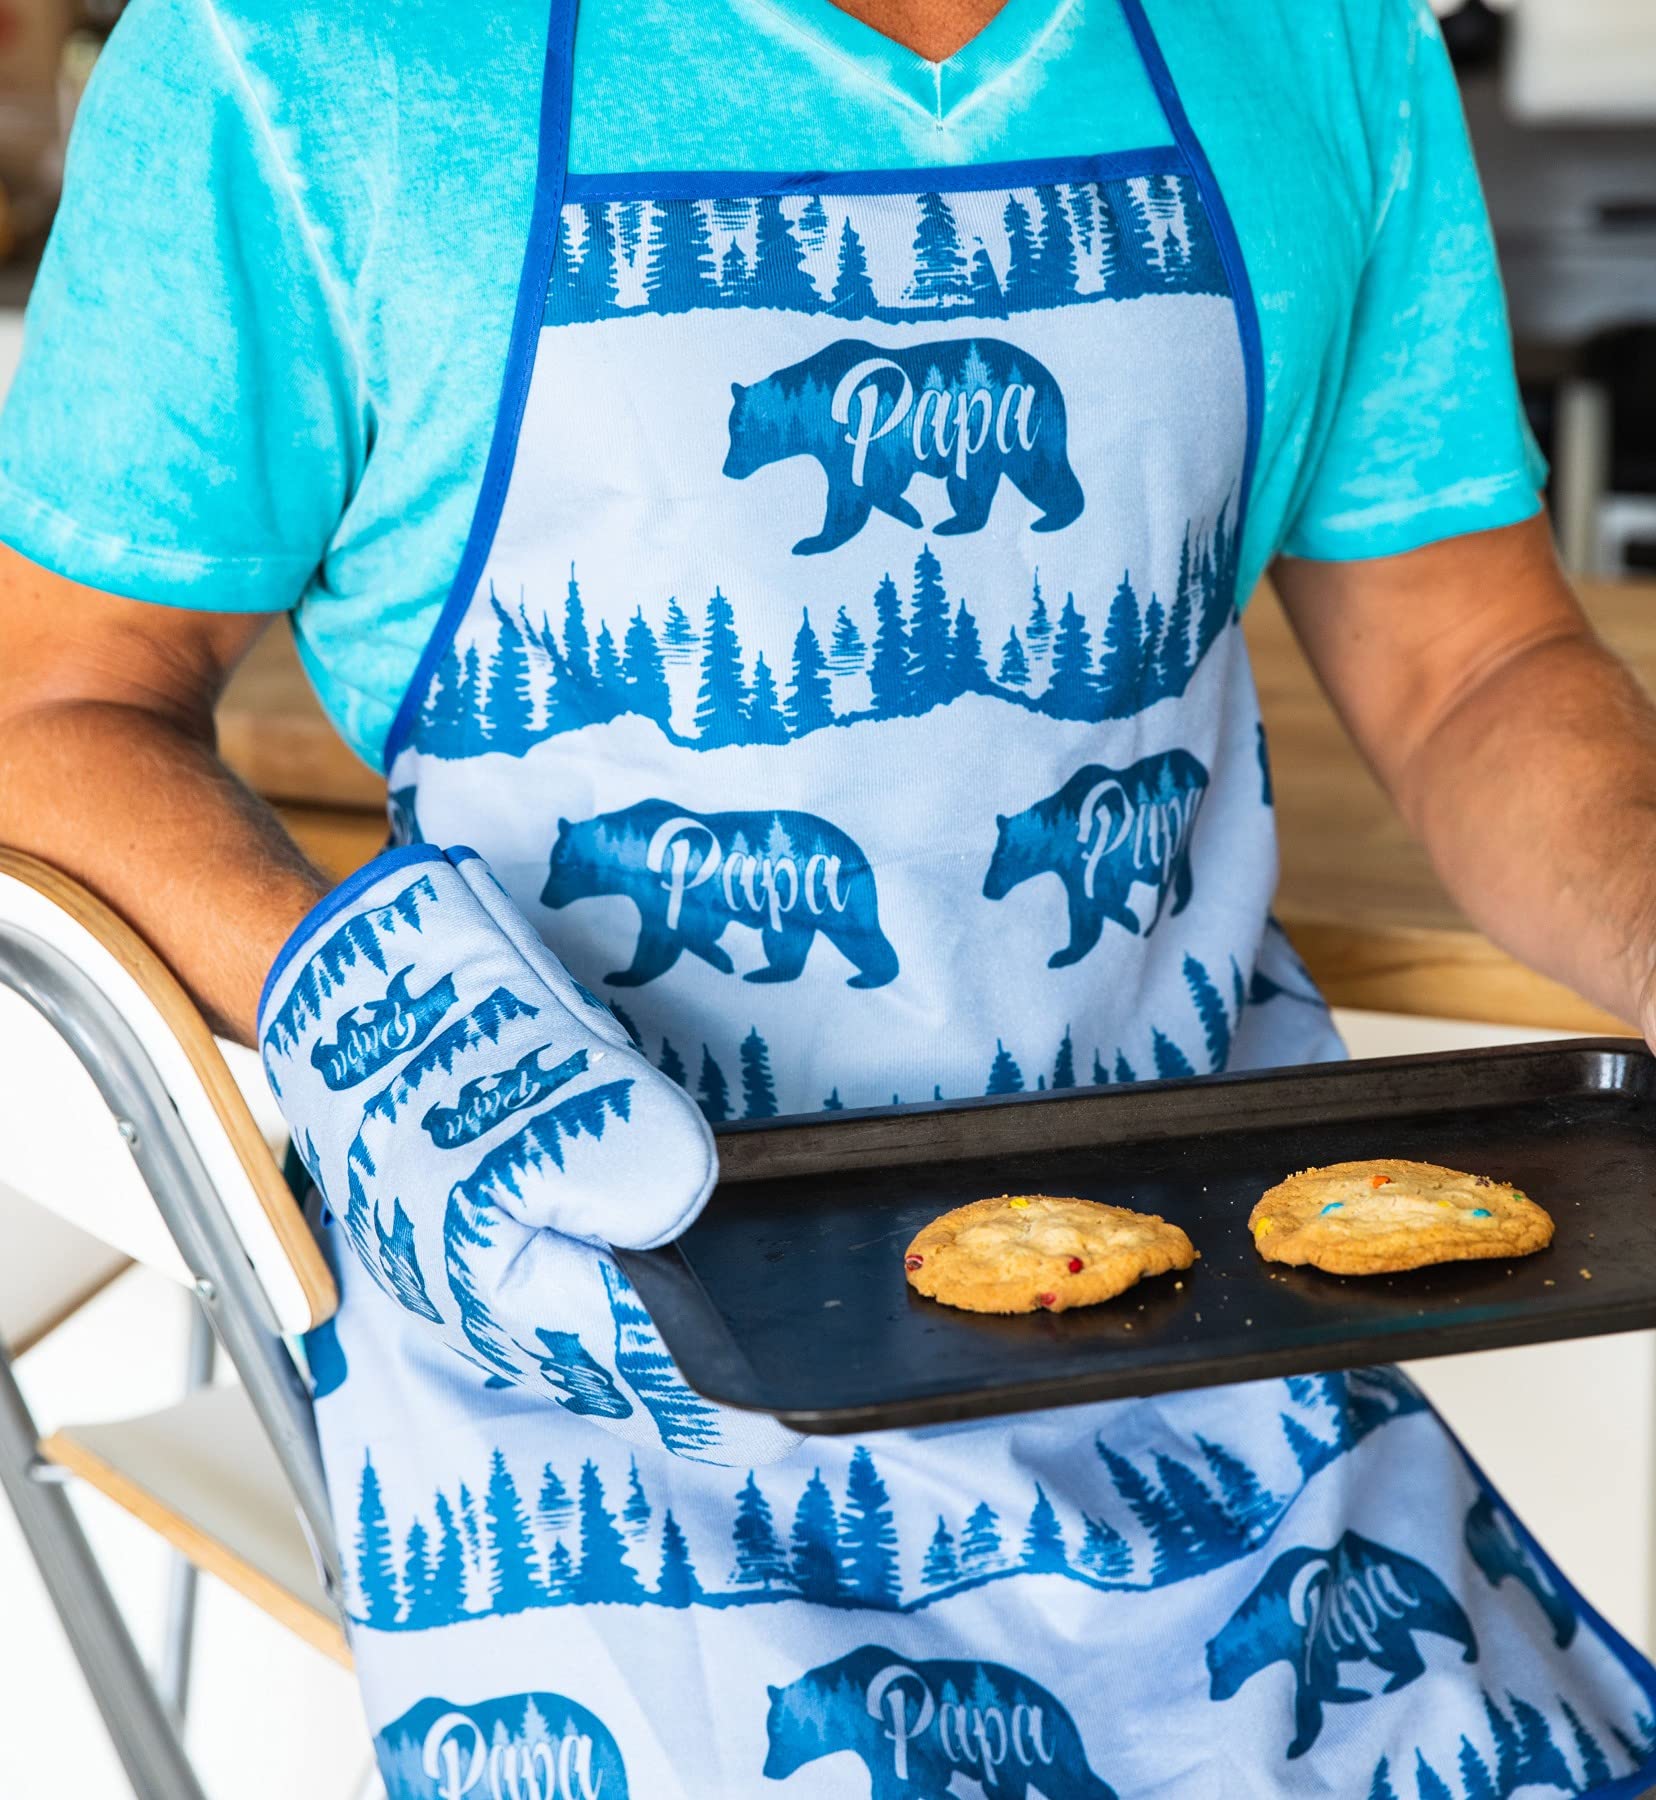 Papa Bear Funny Fathers Day Cooking Forest Graphic Novelty Kitchen Accessories Funny Graphic Kitchenwear Dad Joke Funny Animal Novelty Cookware Blue Oven Mitt